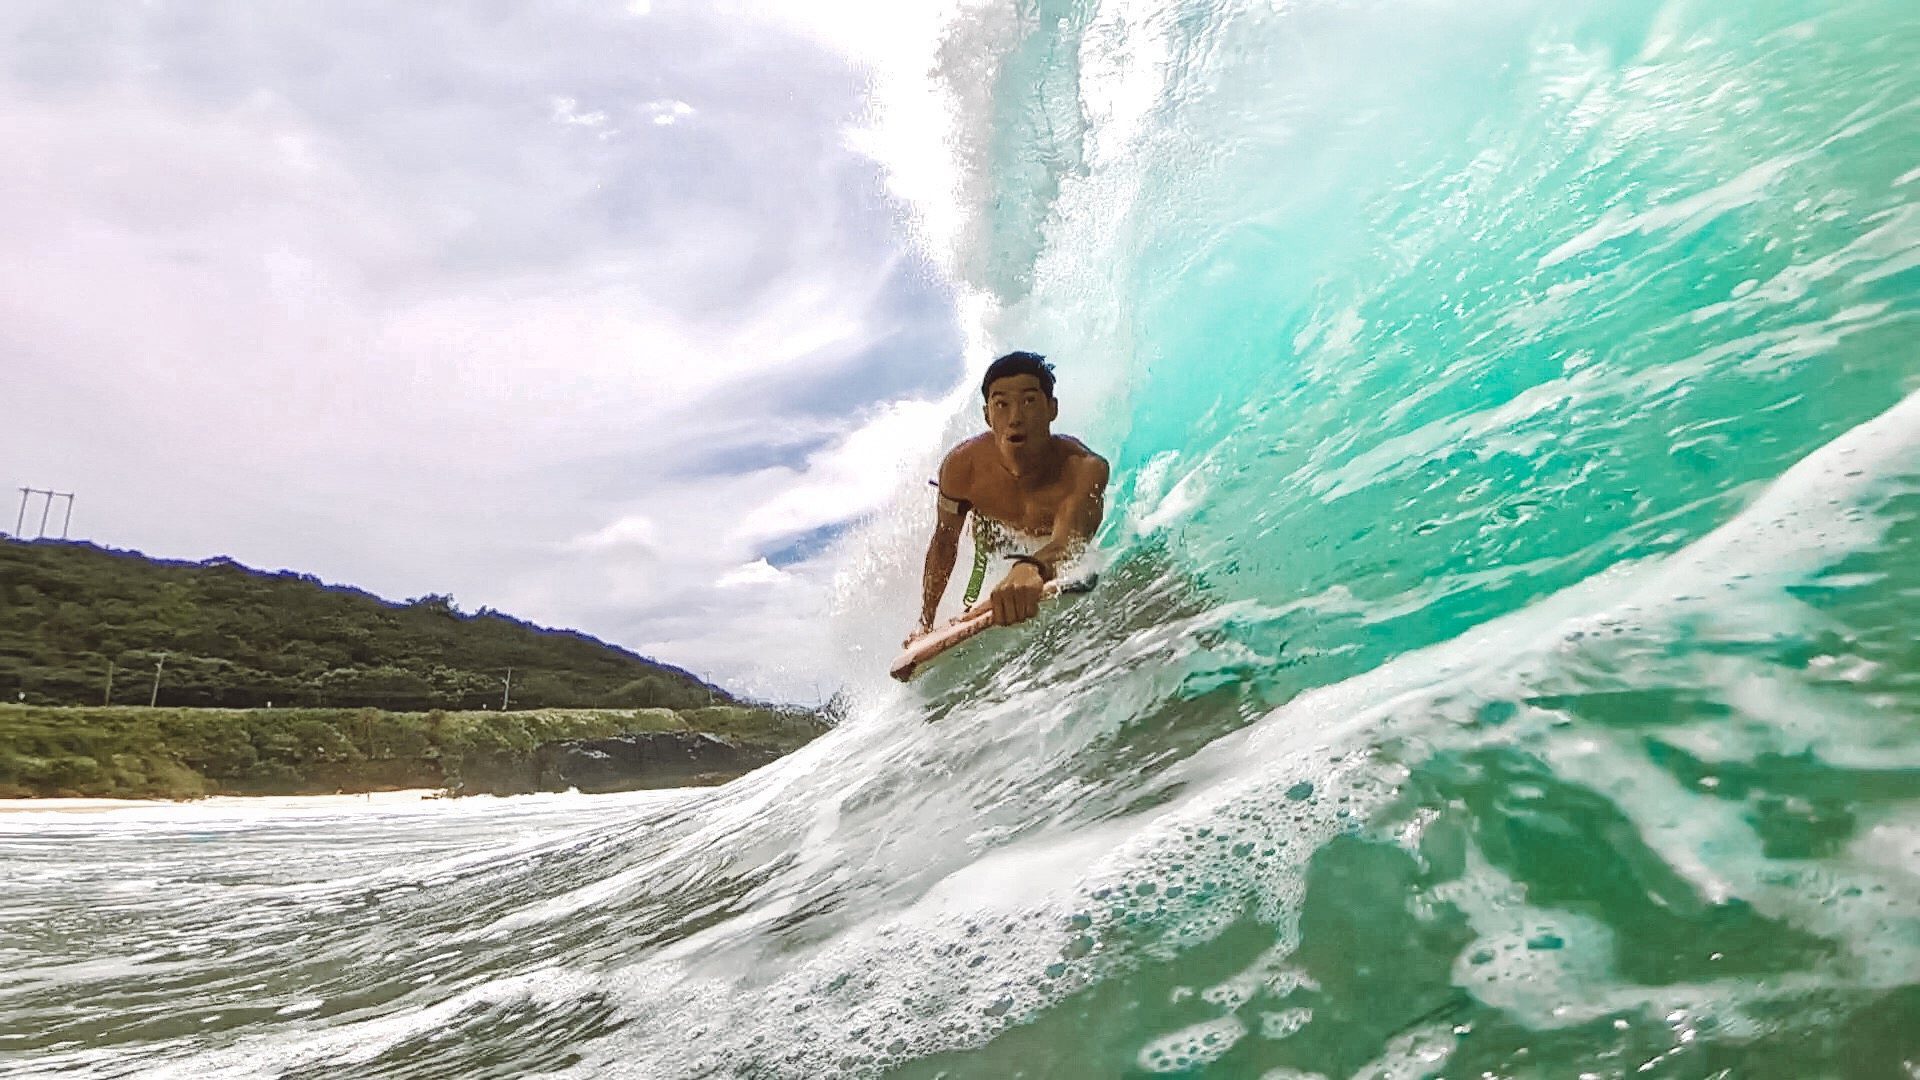 Video: Is This the Most Crowded Surf Spot Ever? - Surfer